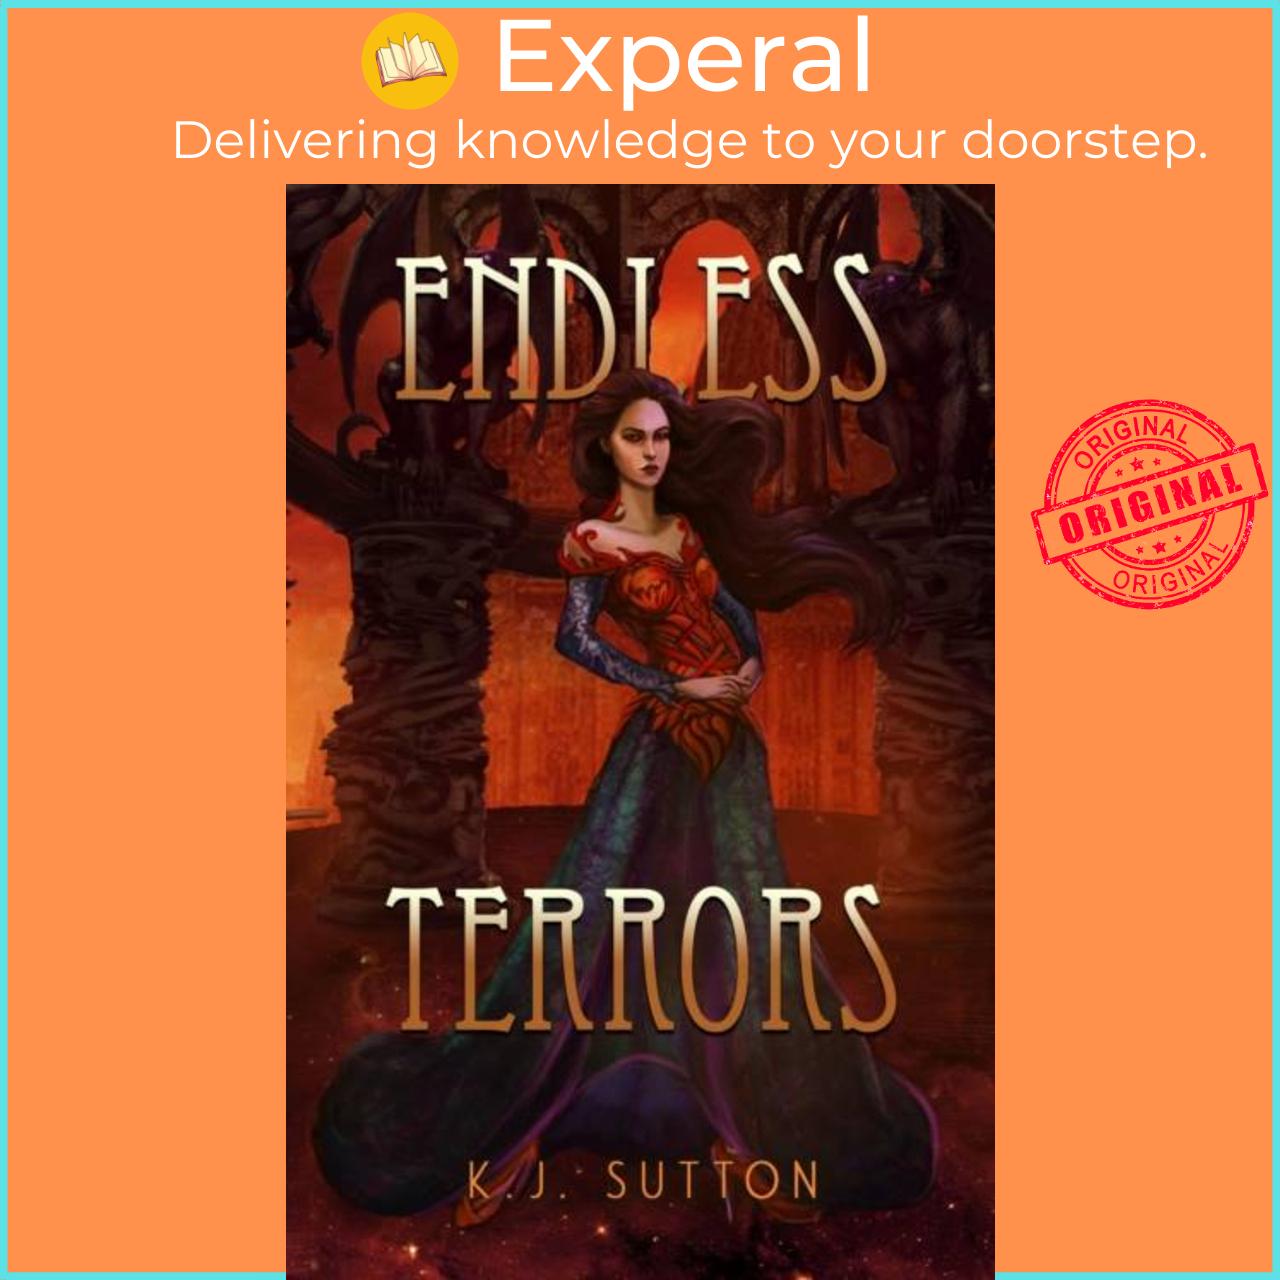 Sách - Endless Terrors by K.J. Sutton (UK edition, hardcover)